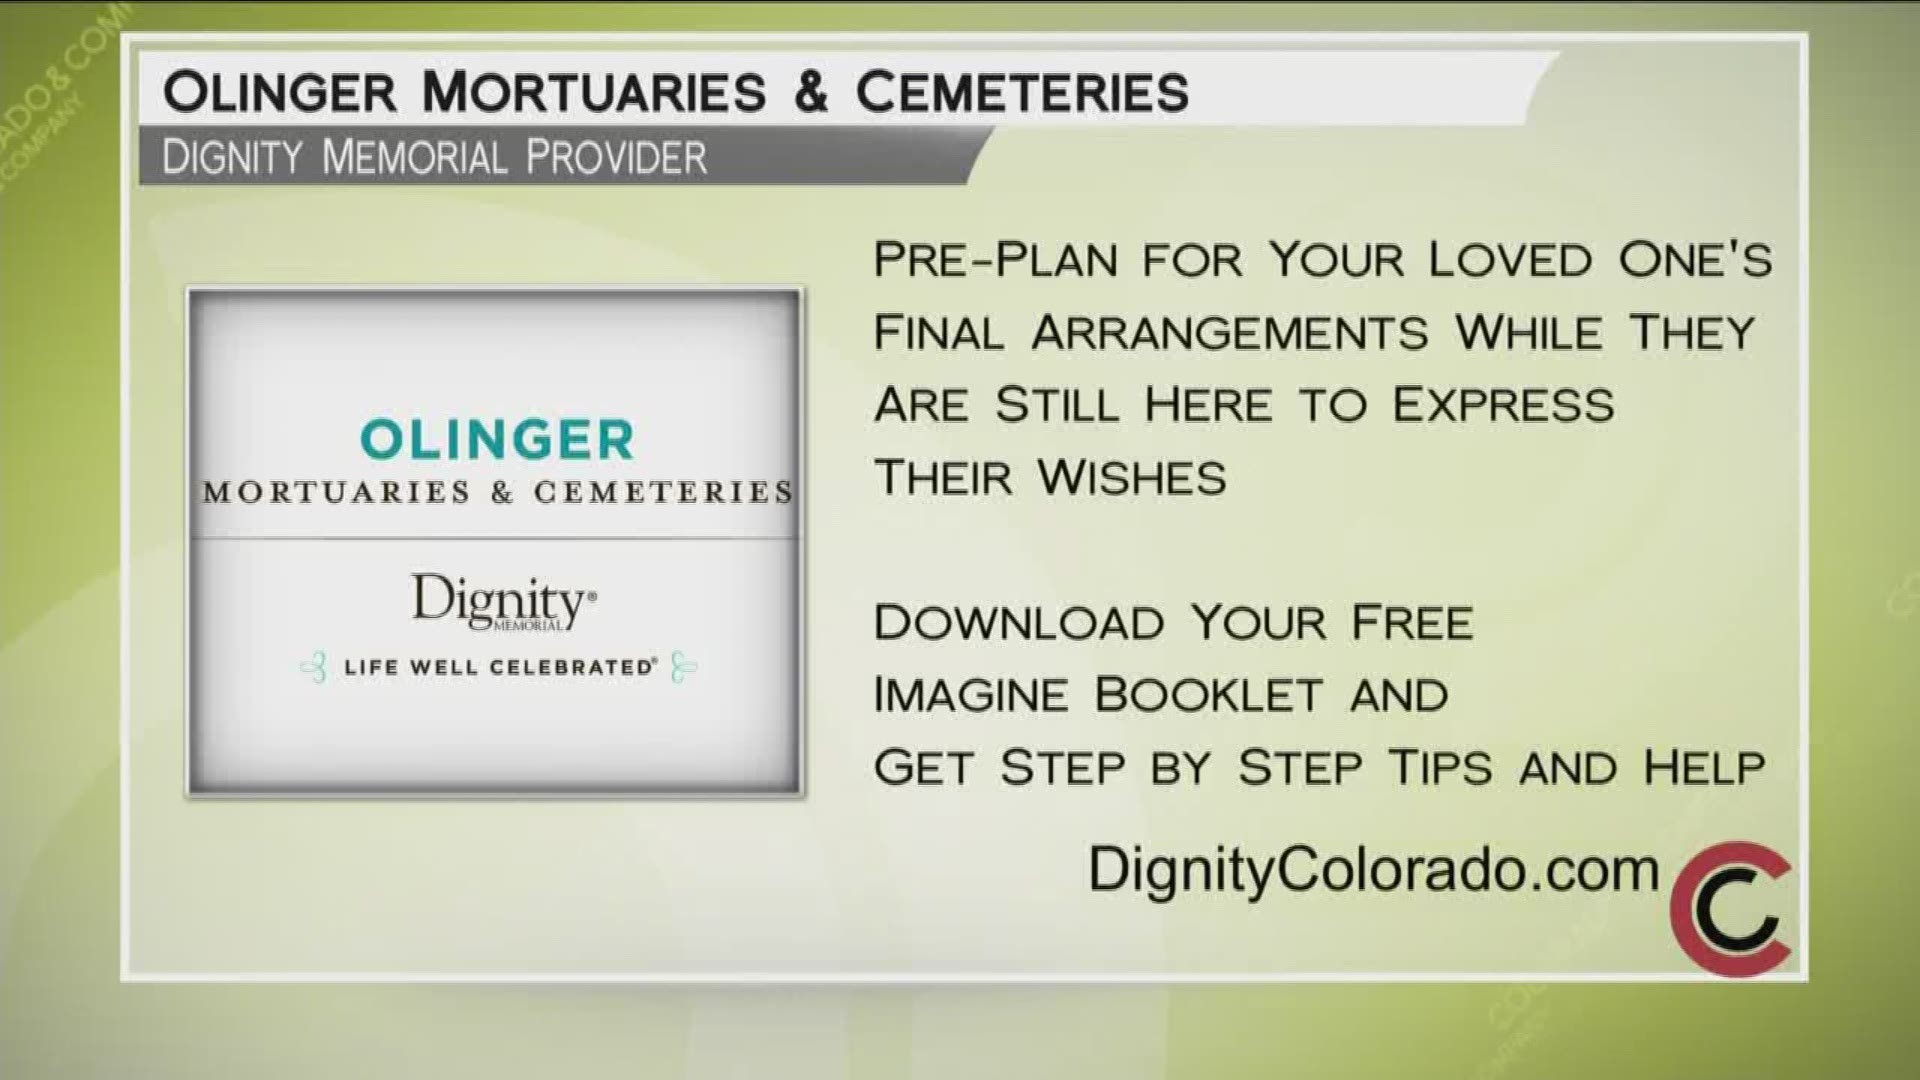 Learn more about Shannon’s advice for end of life care at www.DignityColorado.com. Download a free Imagine Booklet to walk you through her steps and to find the Olinger Mortuary and Cemetery closest to you. 
THIS INTERVIEW HAS COMMERCIAL CONTENT. PRODUCTS AND SERVICES FEATURED APPEAR AS PAID ADVERTISING.